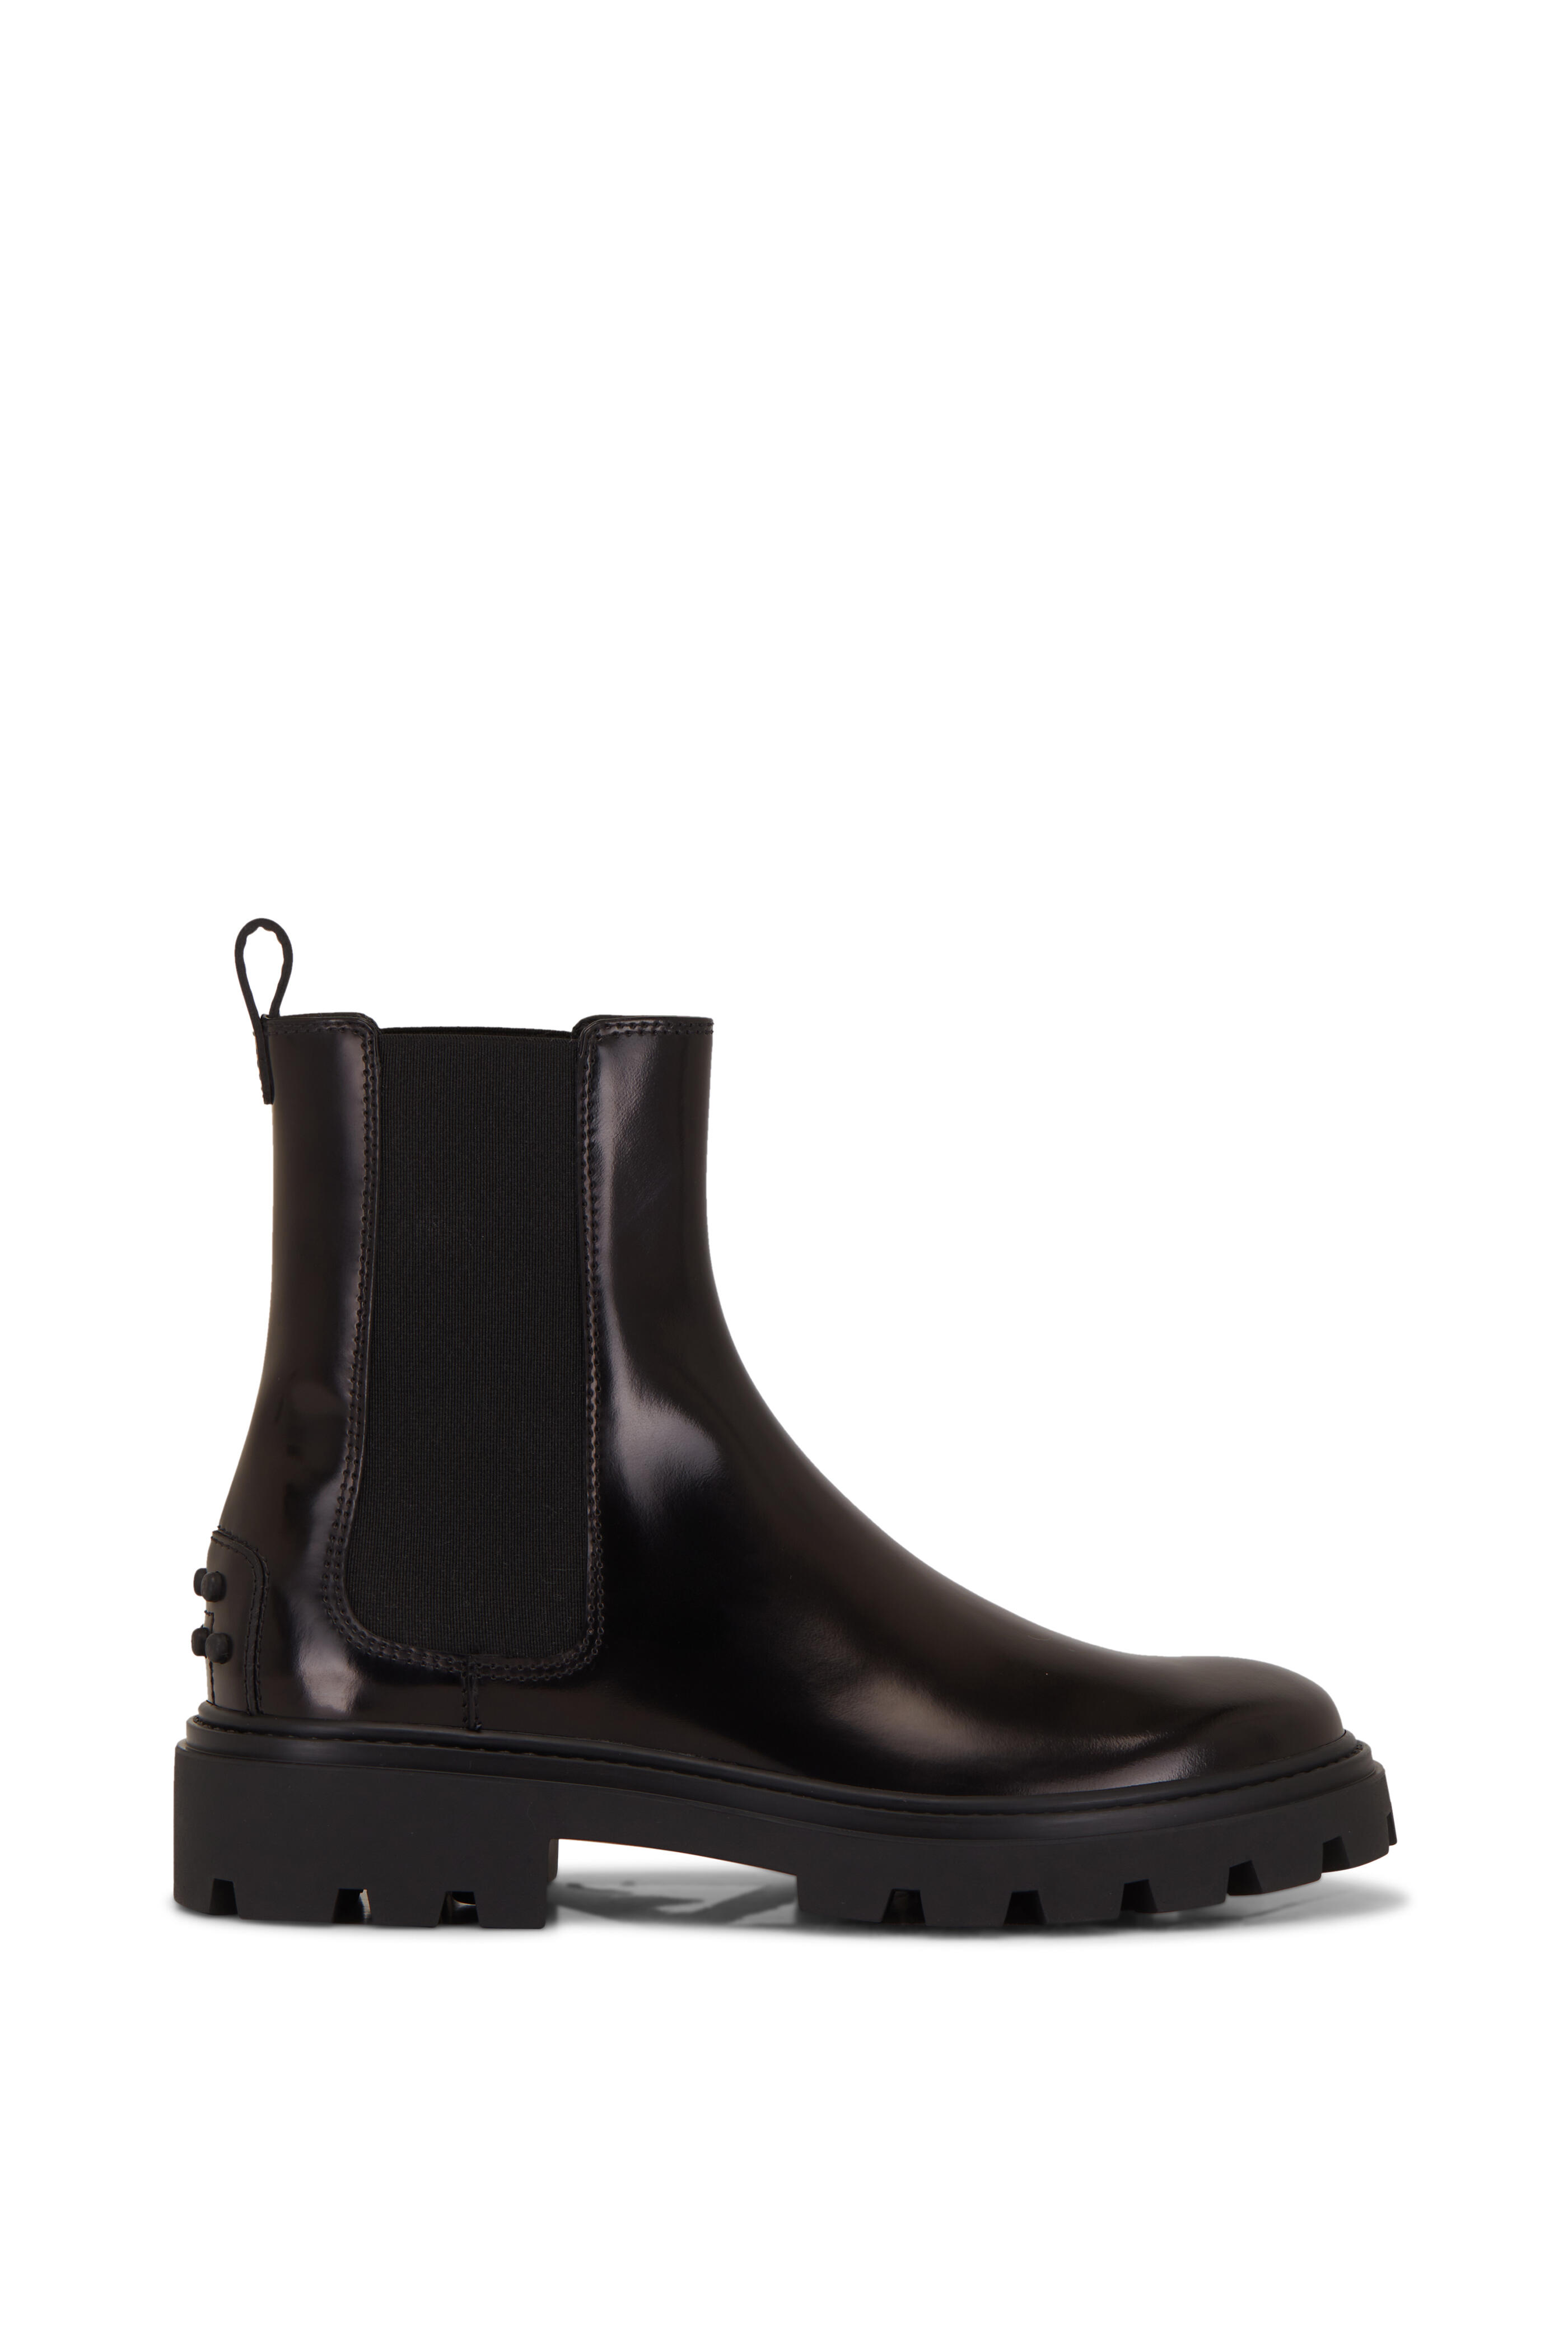 Tod's - Gomma Black Shiny Leather Double Gore Boot